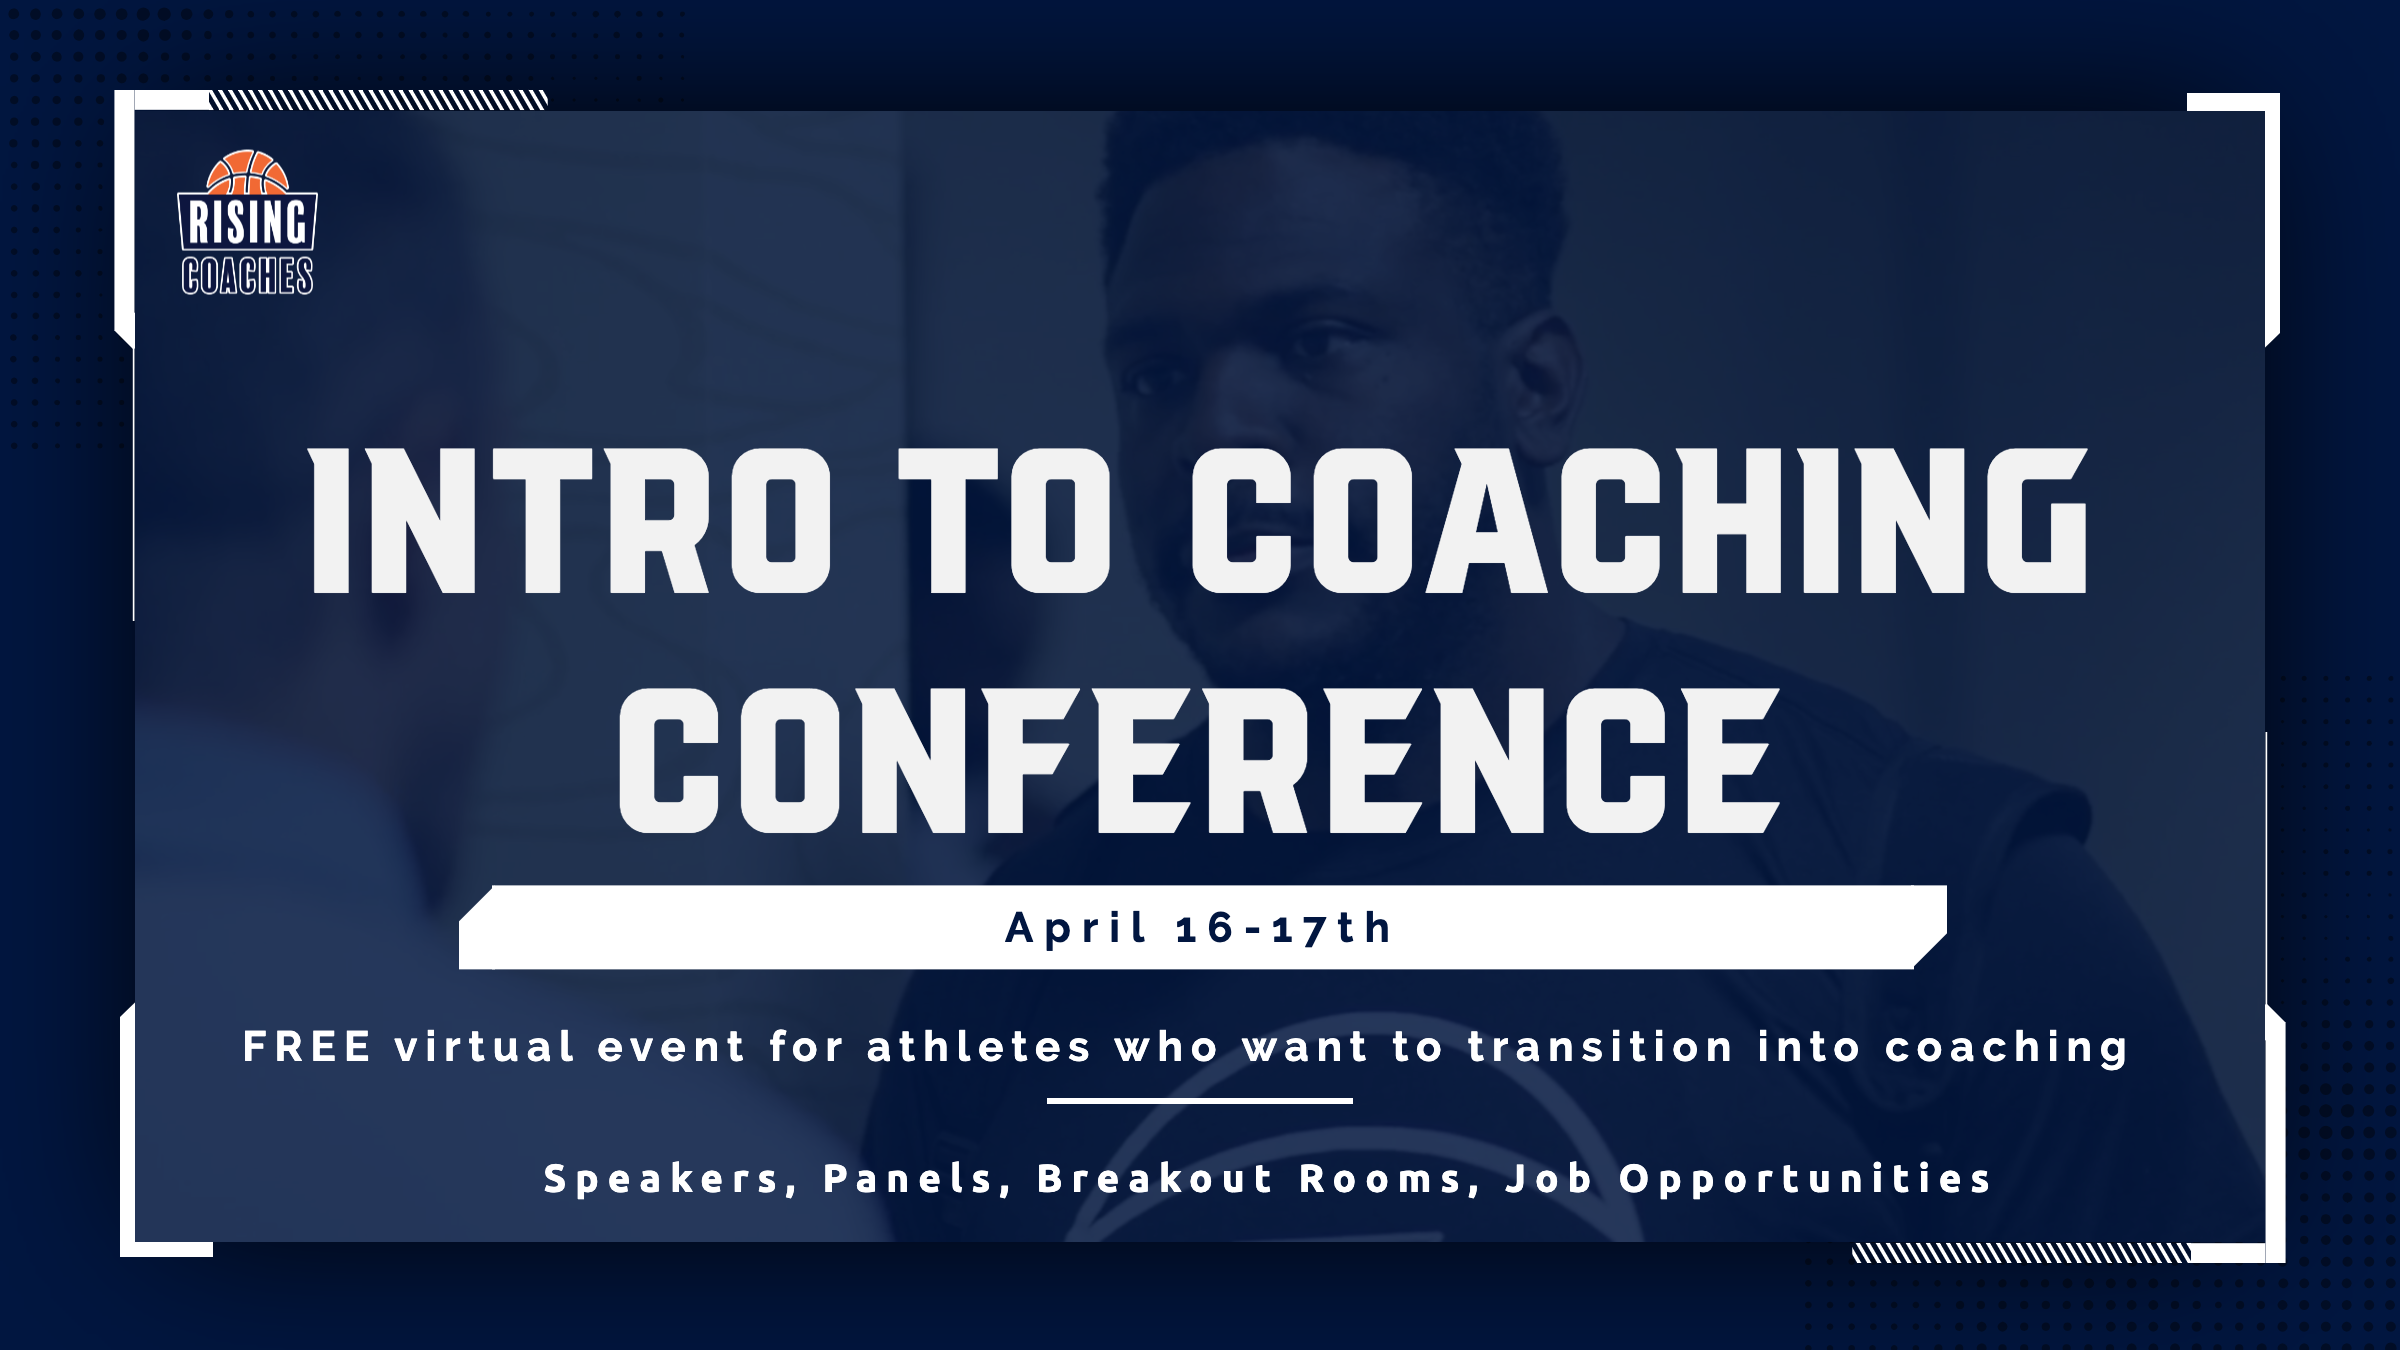 Intro to Coaching Conference HoopDirt